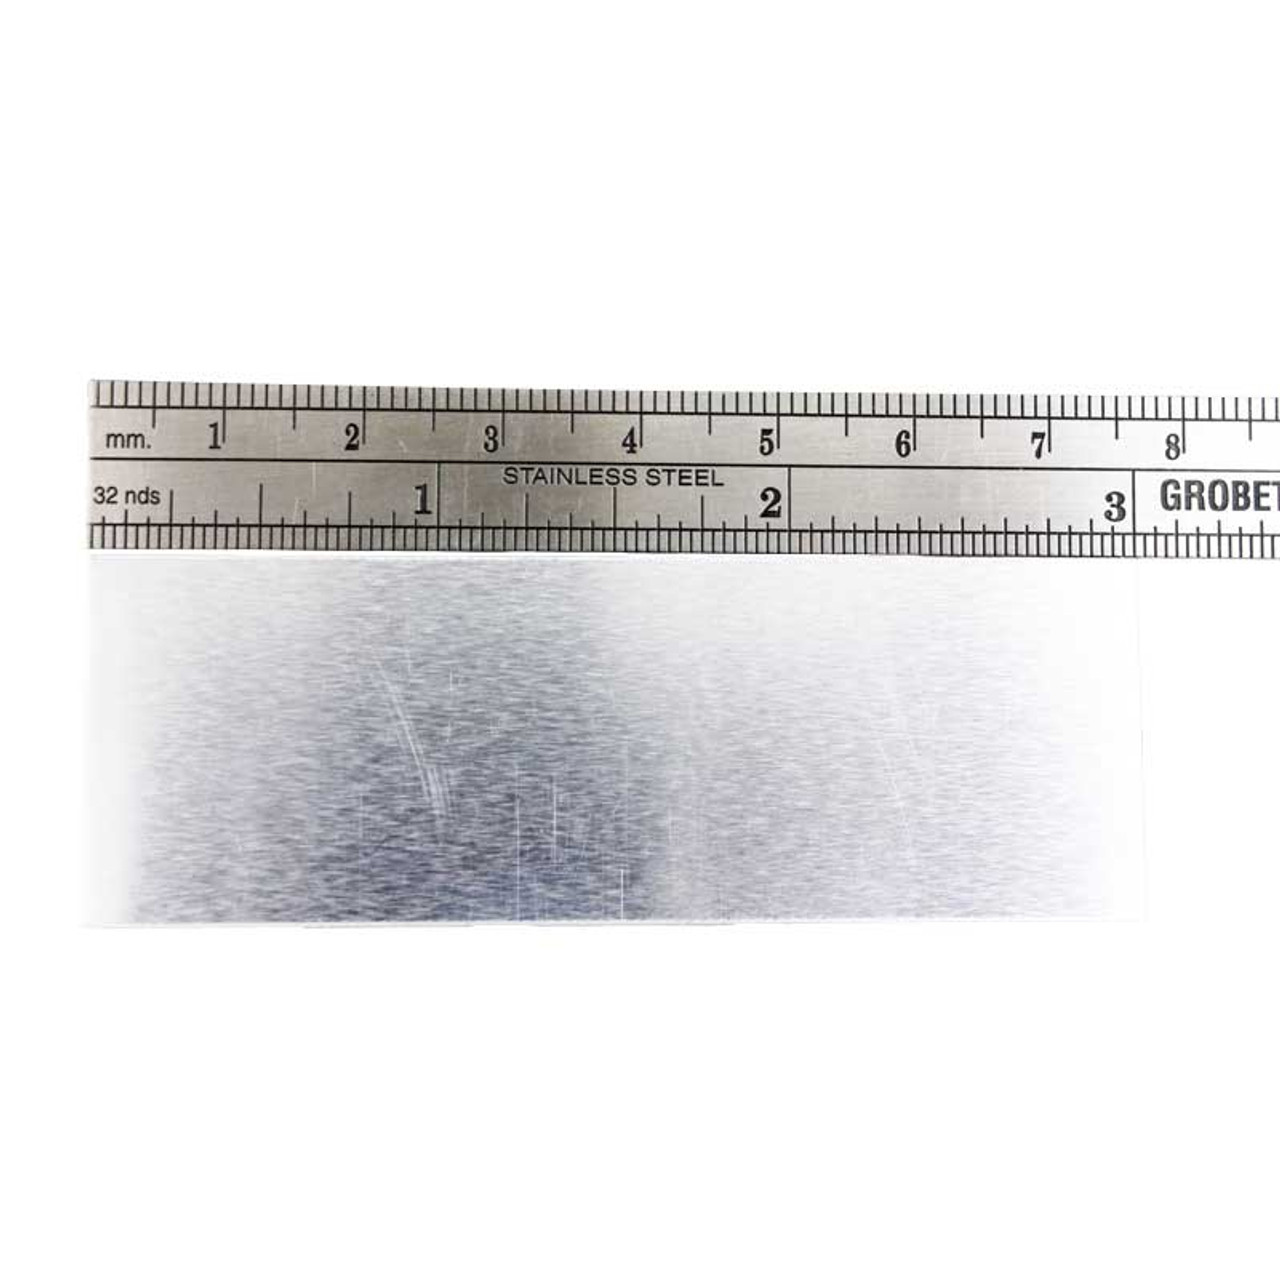 Plastic 7 inch Ruler with Millimeters and Inches mm in Metal Gauge Ruler